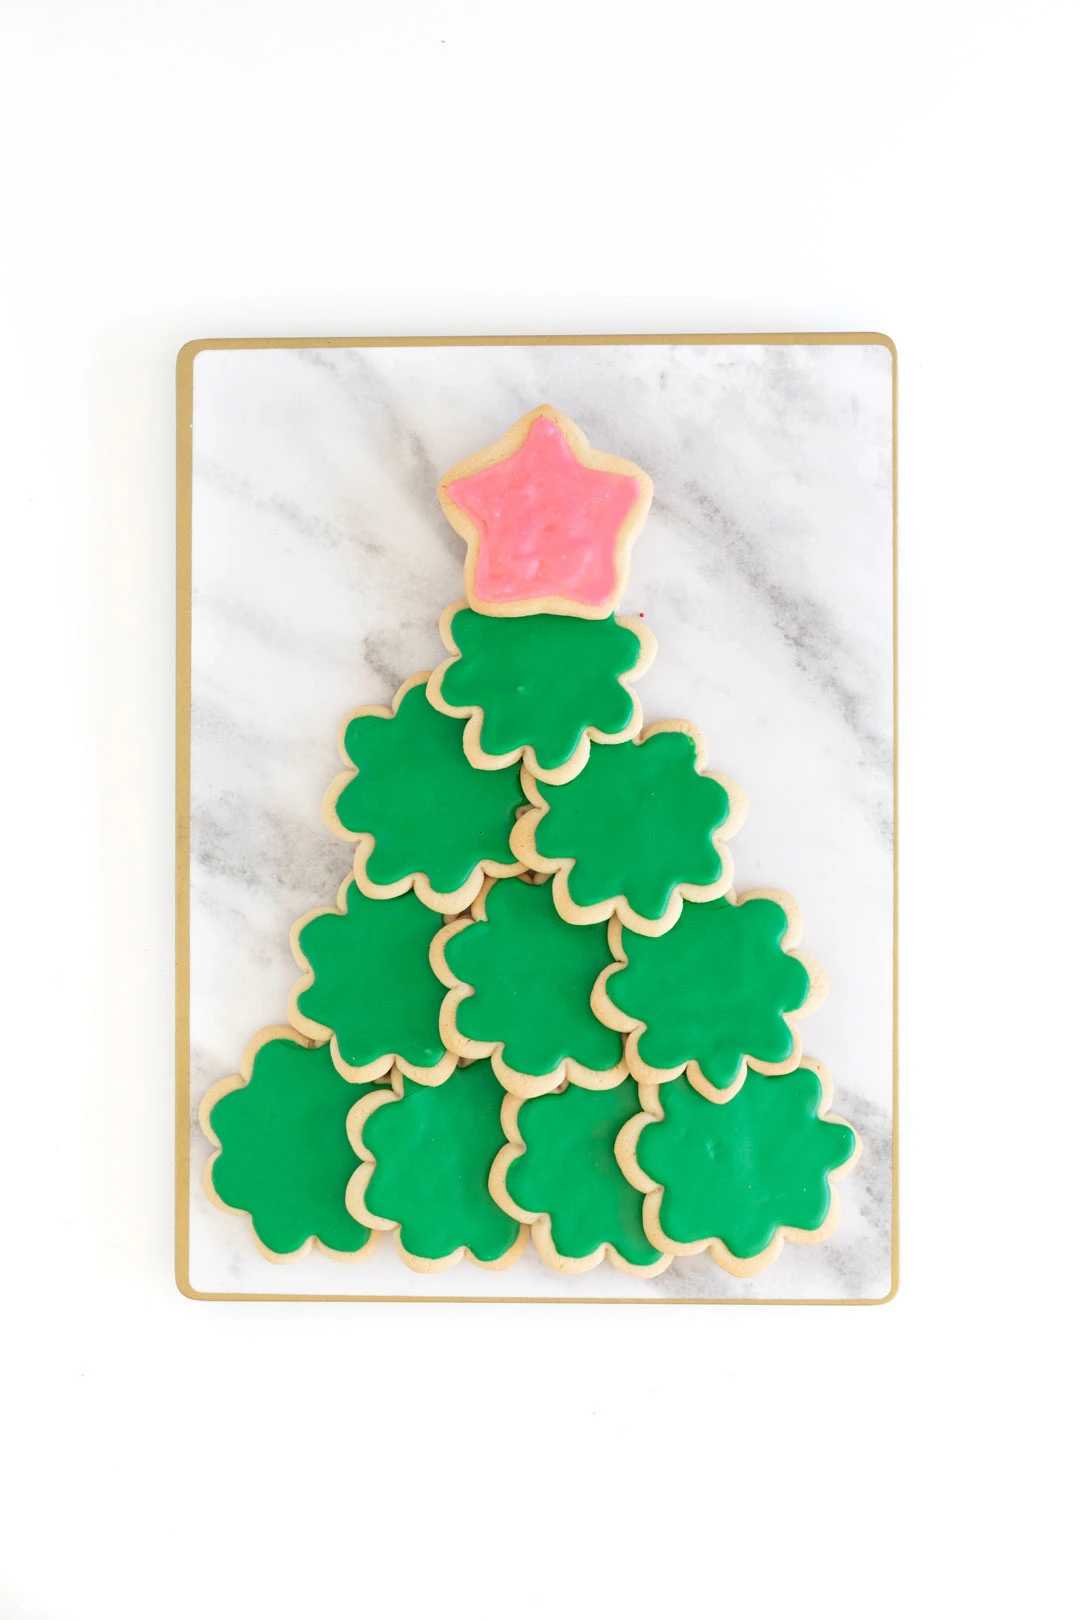 a cookie christmas tree being prepared on a marble colored cutting board. green frosted sugar cookies for the base and pink frosted star for the top